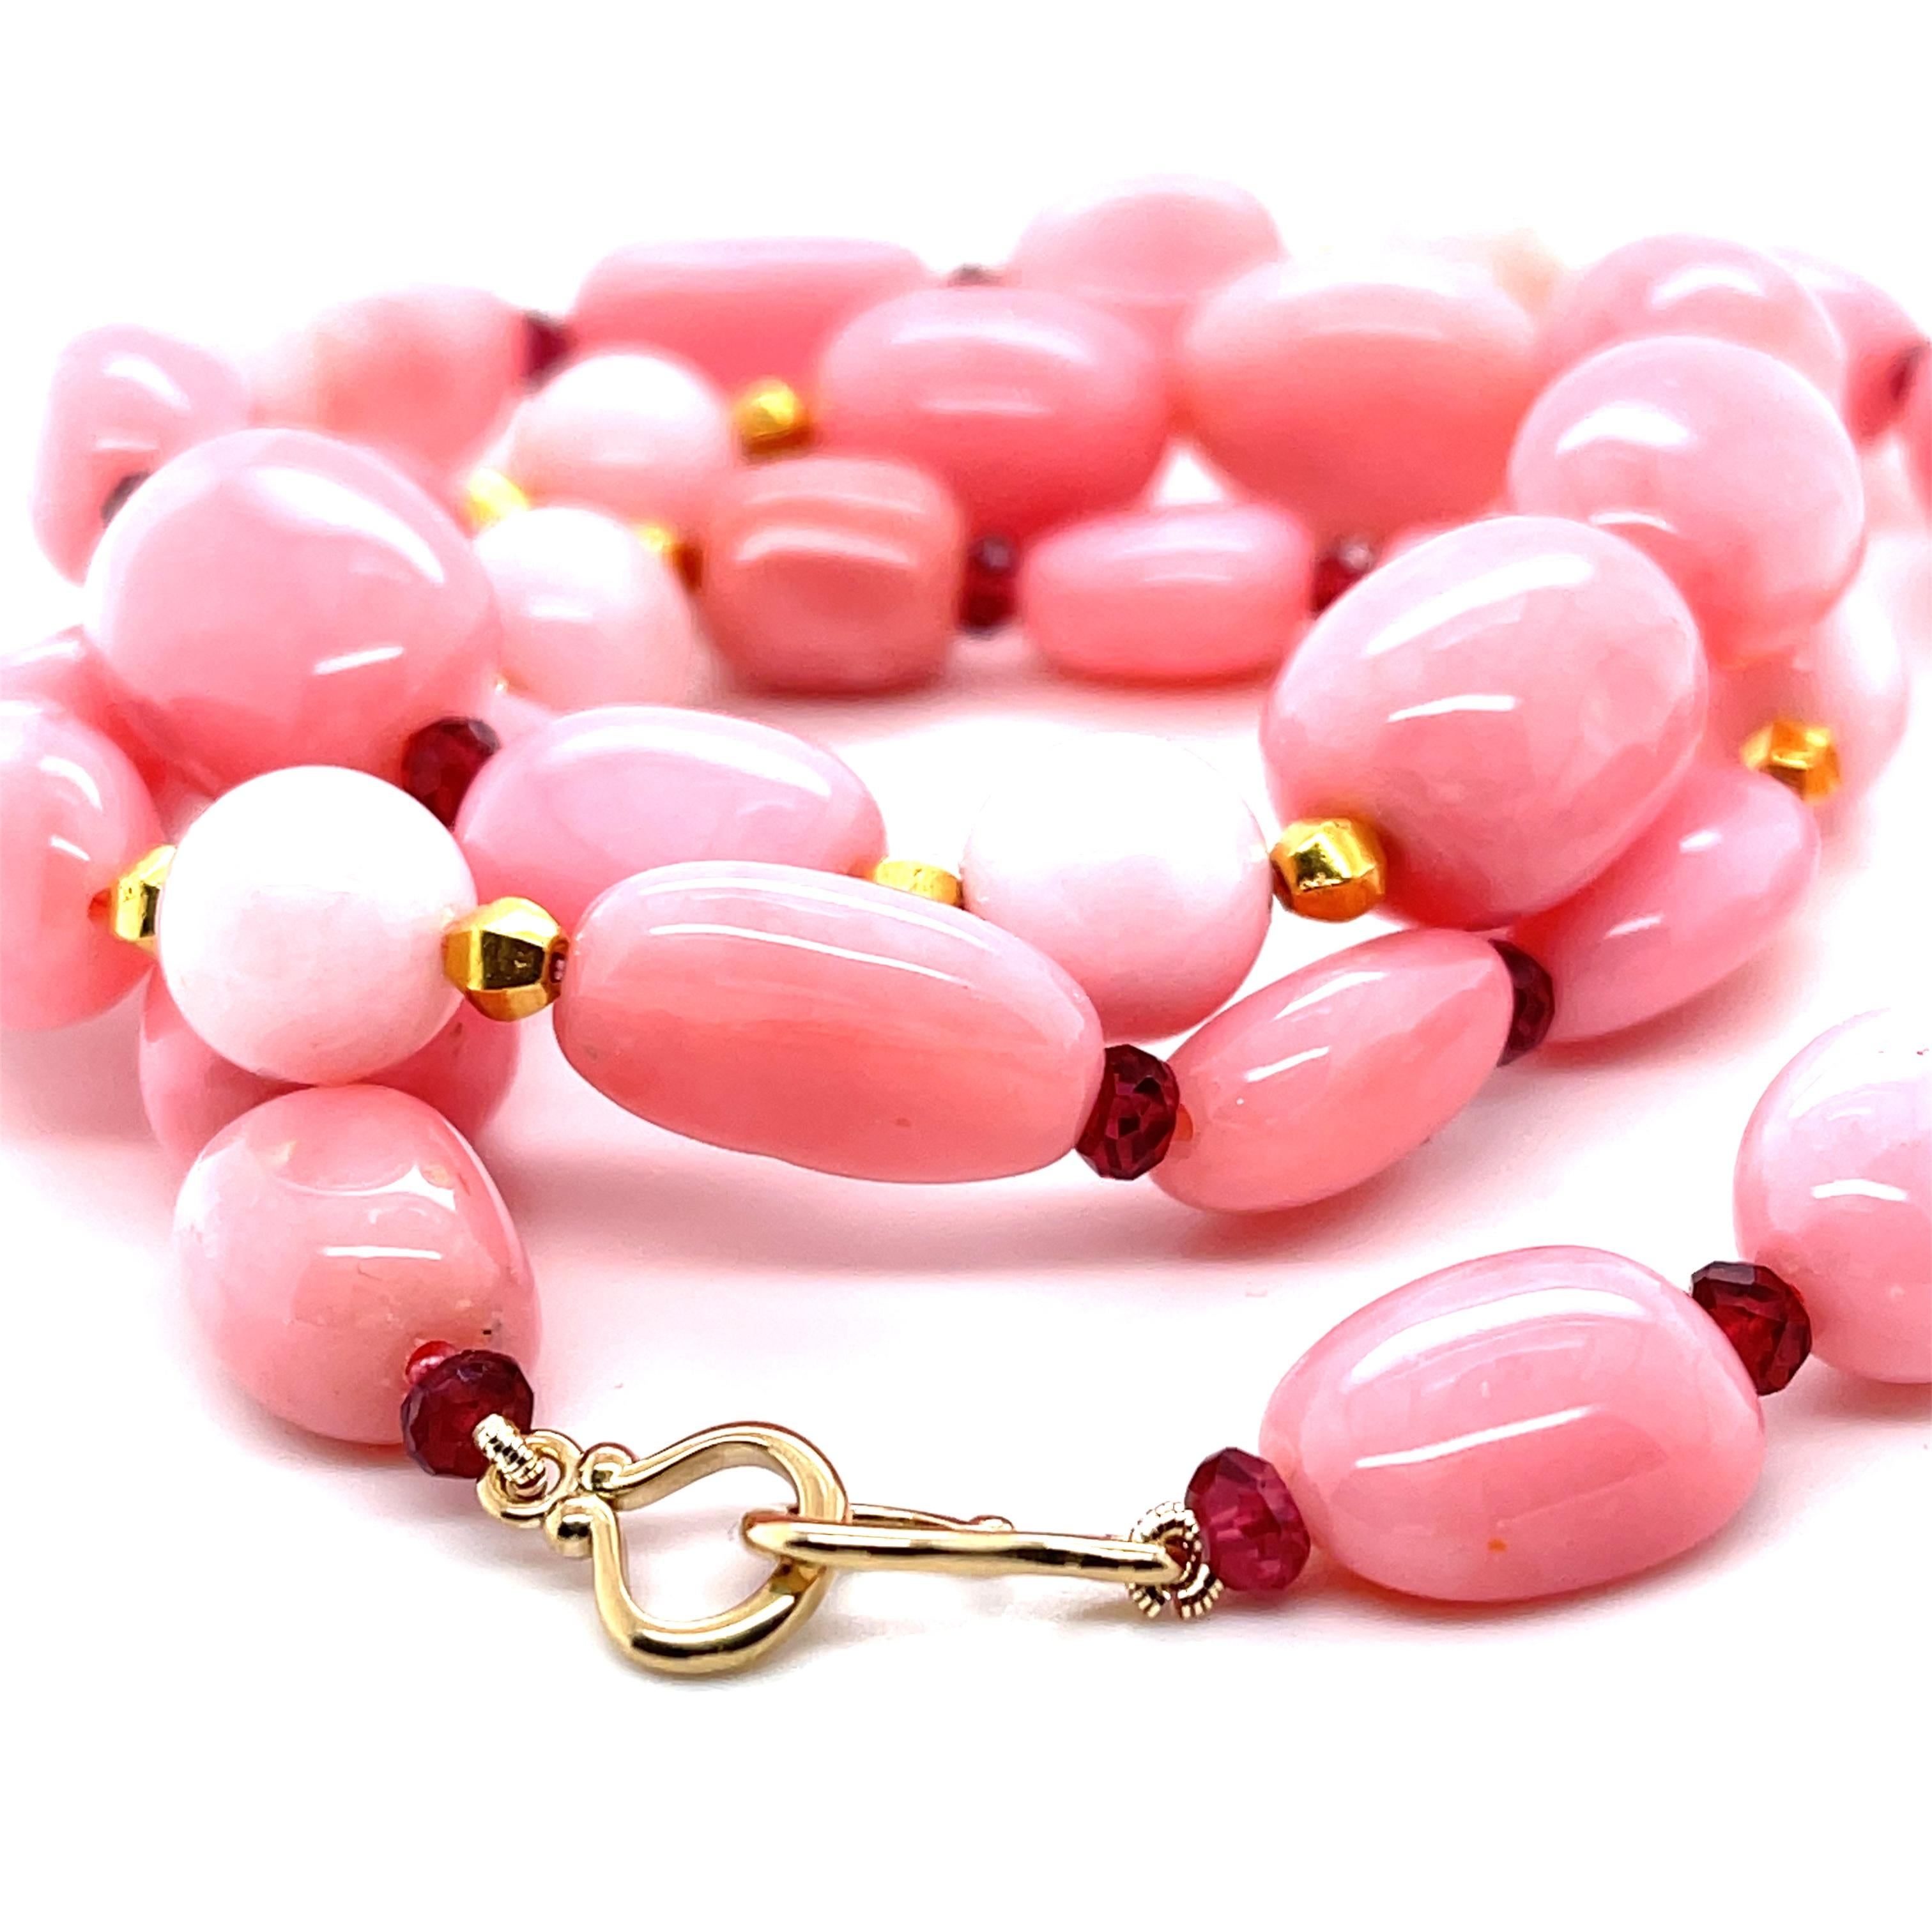 This beautiful necklace features gorgeous Peruvian pink opal beads paired with 